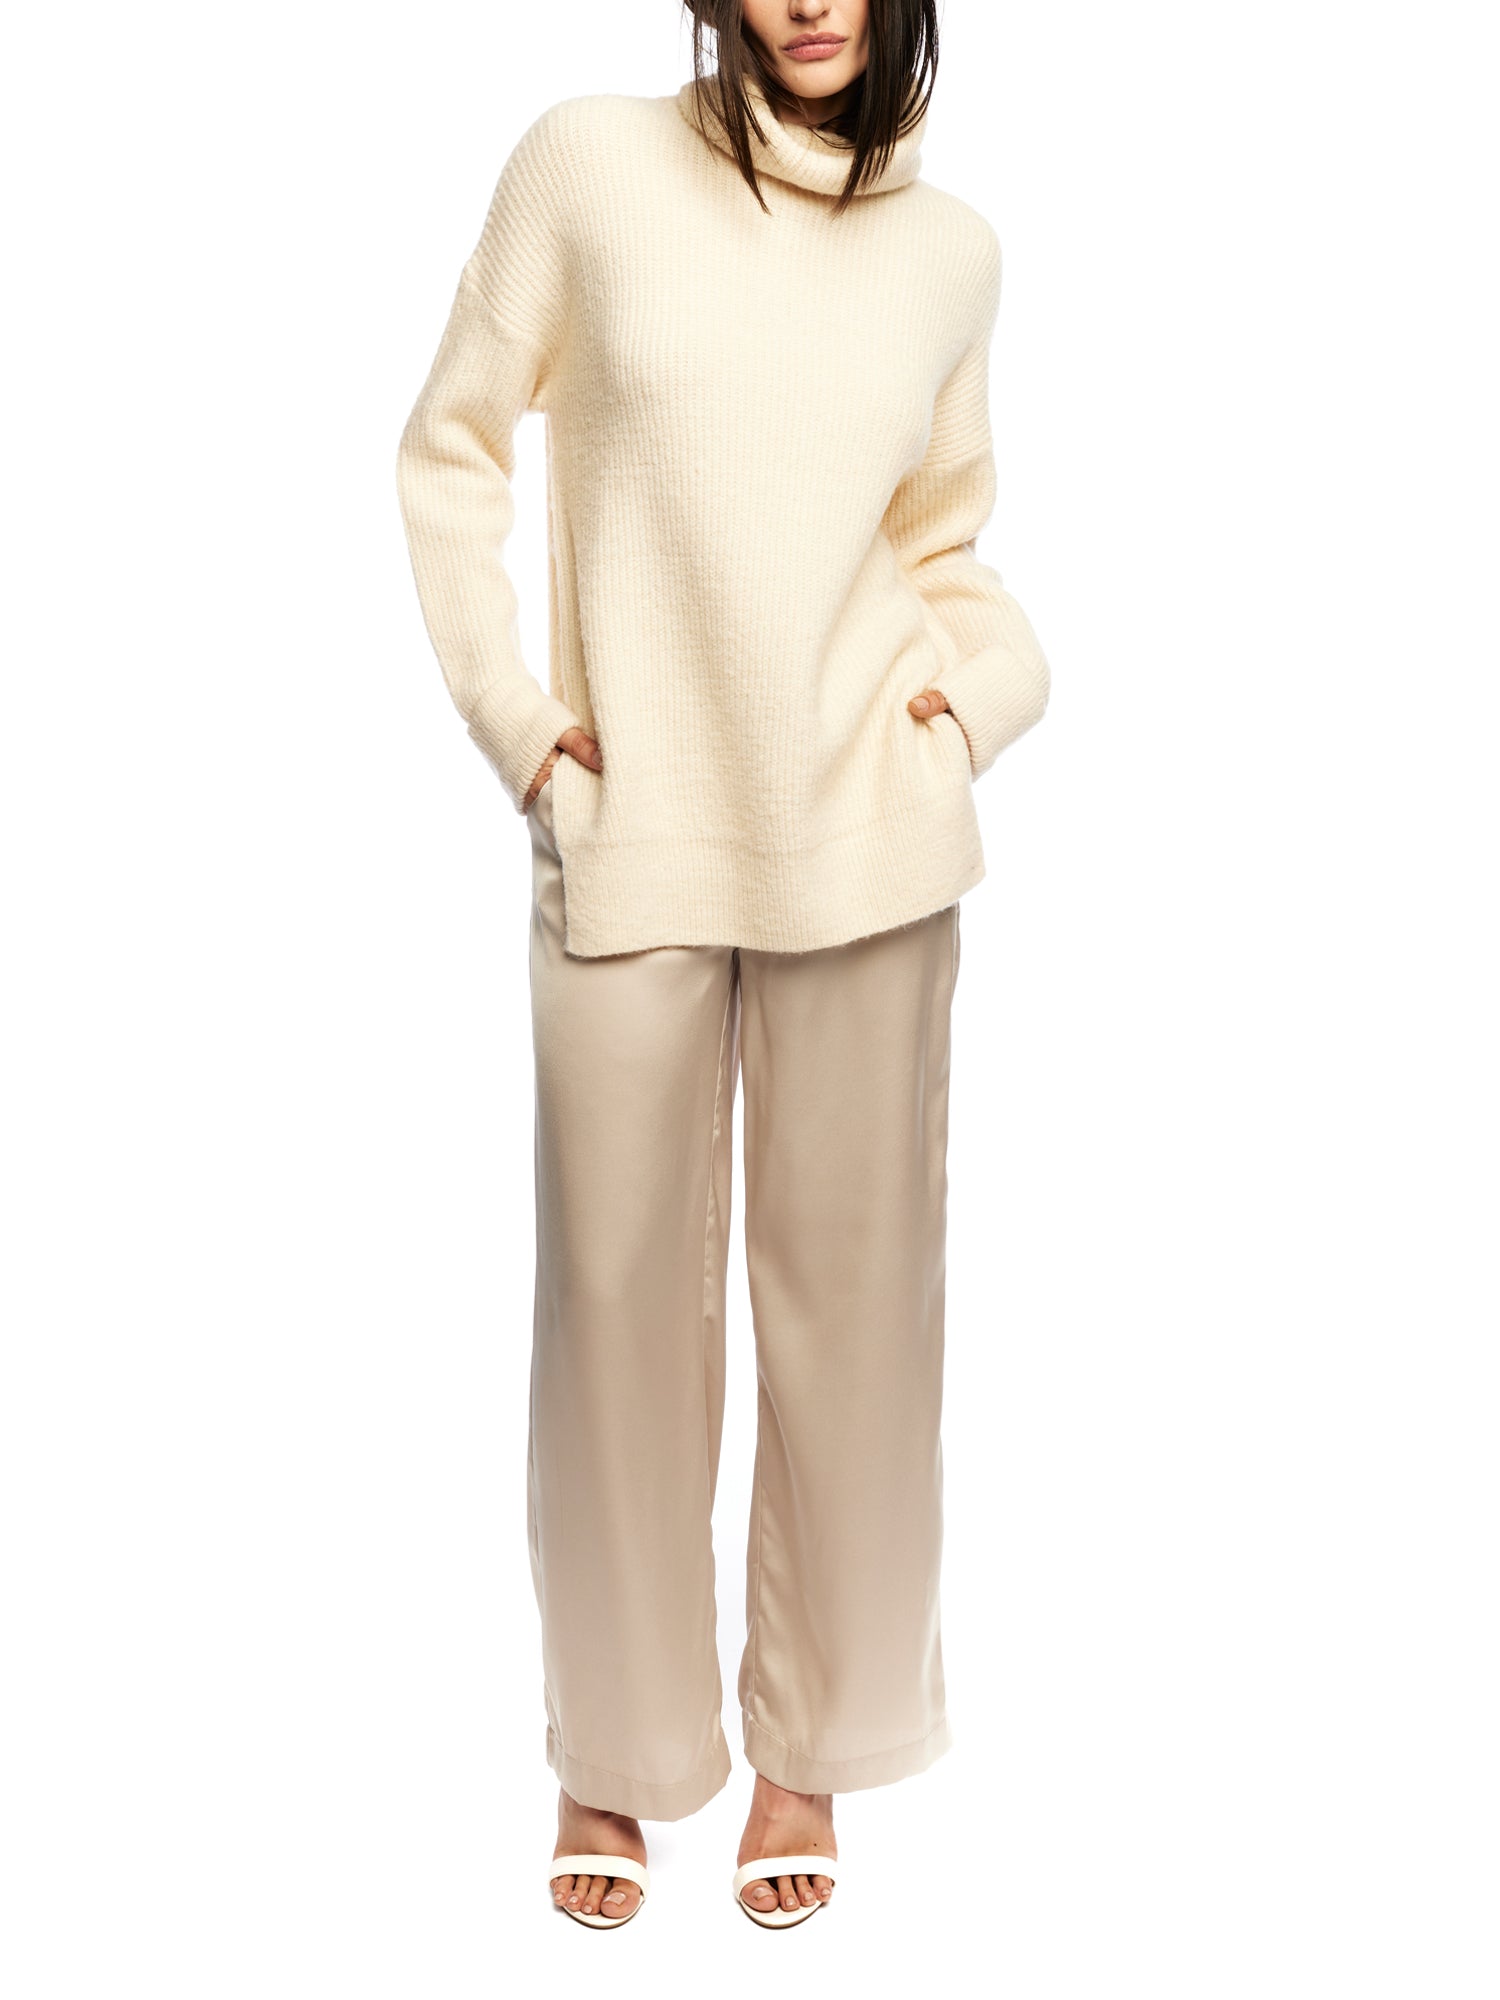 vegan knit, turtleneck sweater featuring long sleeves, a relaxed fit, small side slits and a drop shoulder seam in creme